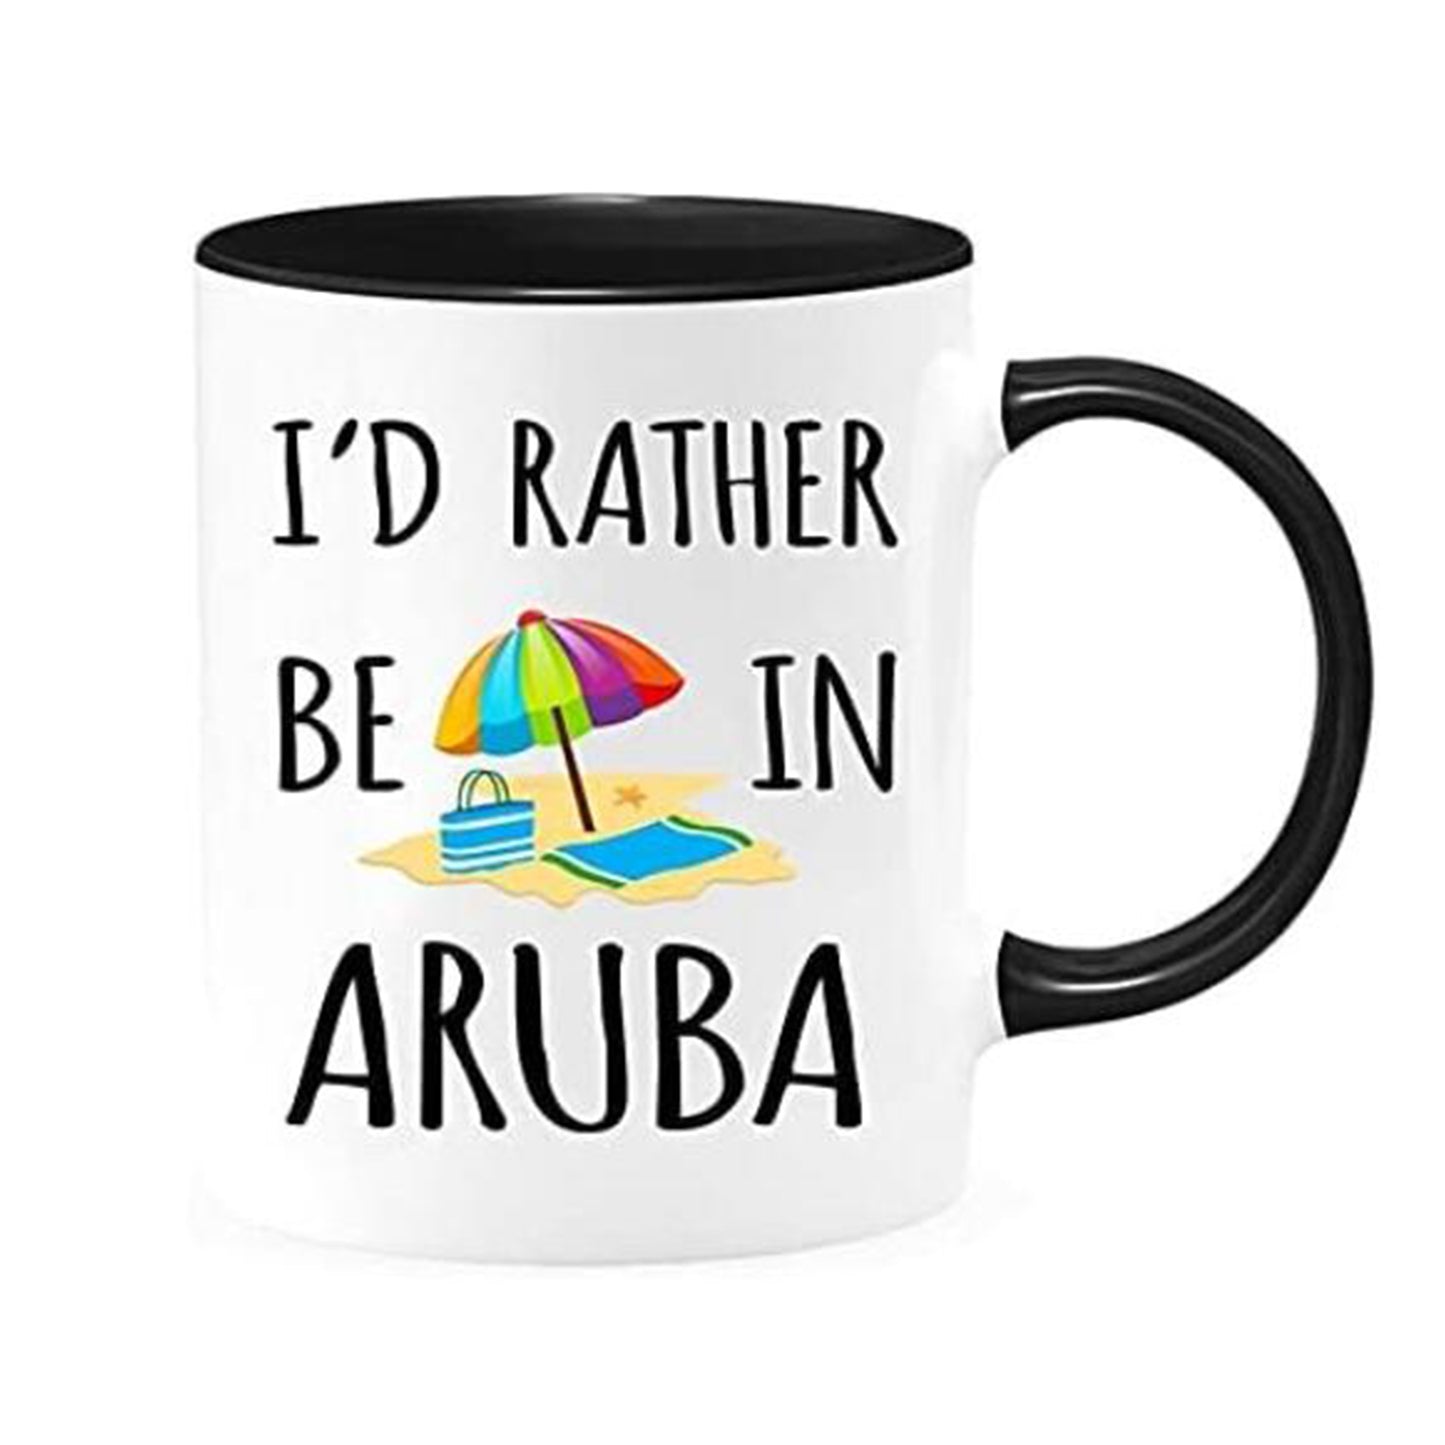 I'd Rather Be In Aruba Coffee Mug Funny Unique Cup Gift